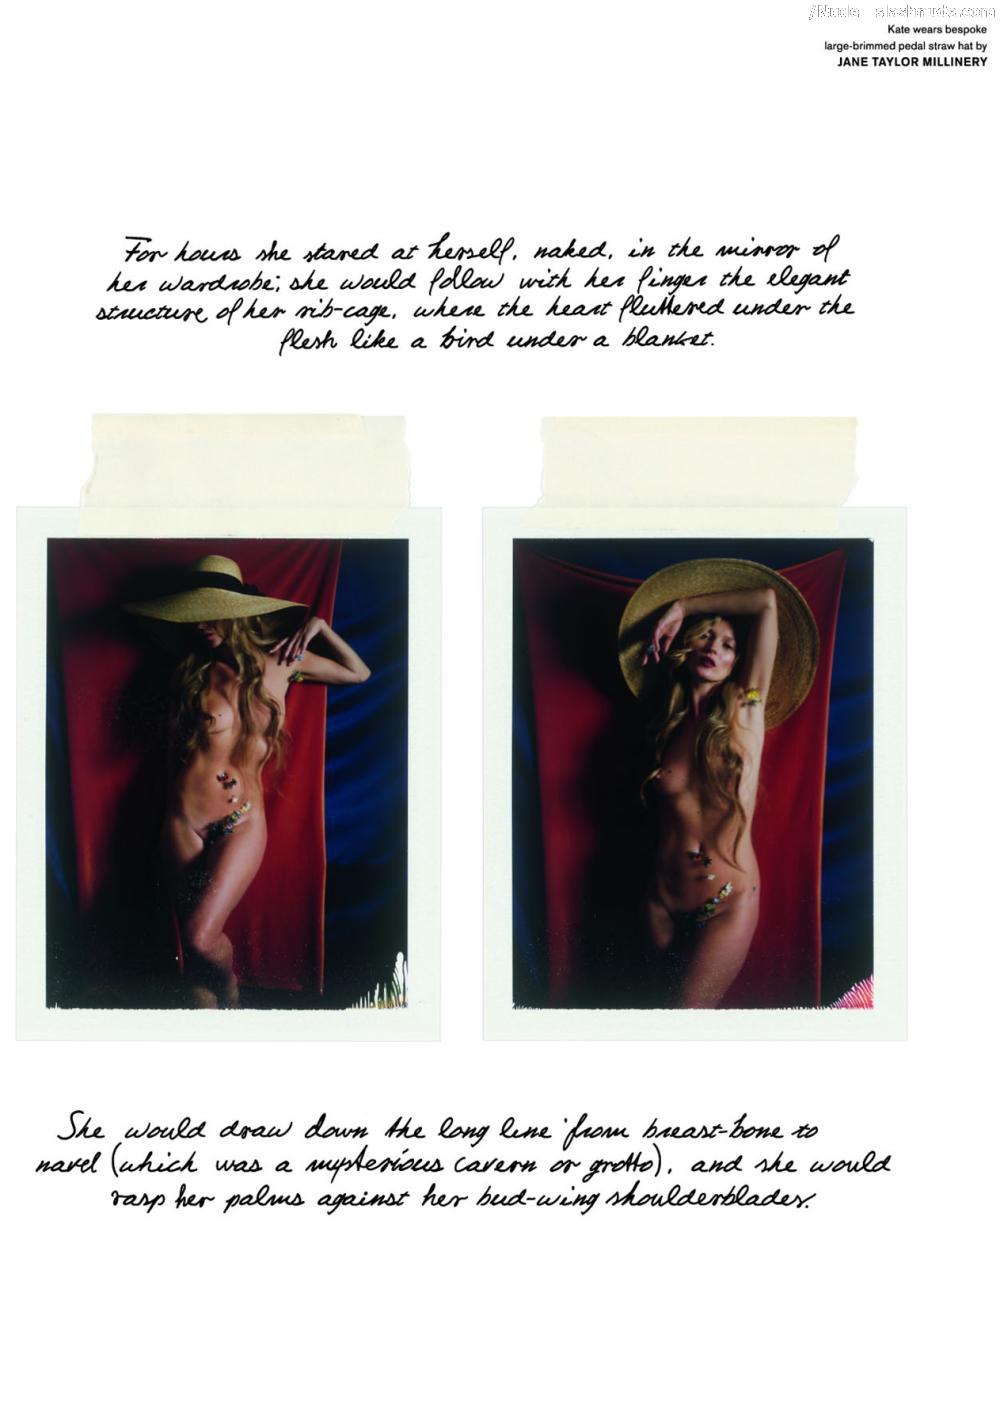 Kate Moss Nude With Bush Up Close For Love Magazine 15